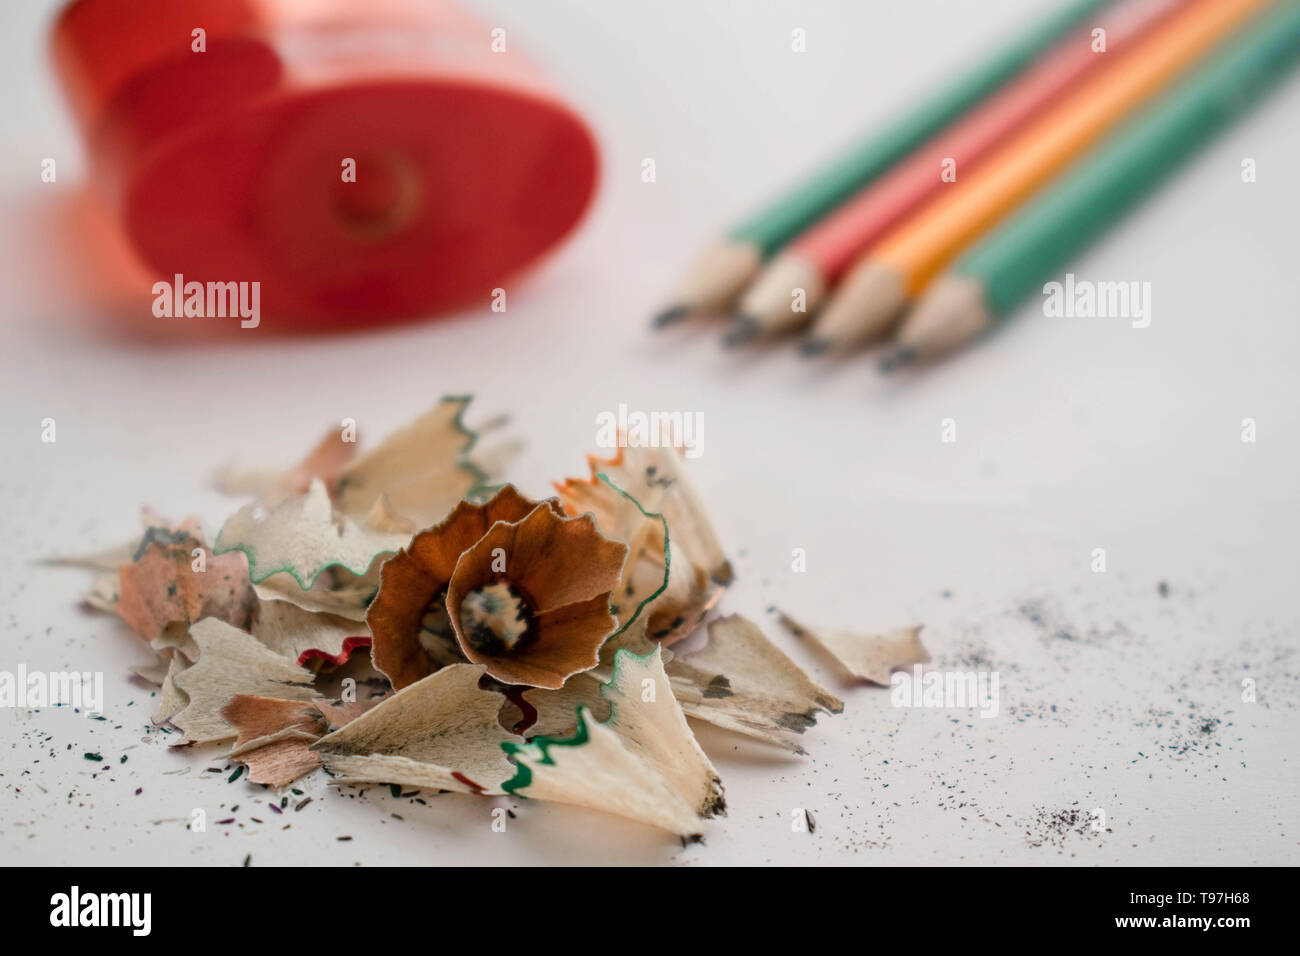 on the background lie red large oval sharpener, colored ground pencils that indicate on a pile of sawdust lying in the foreground, white background Stock Photo